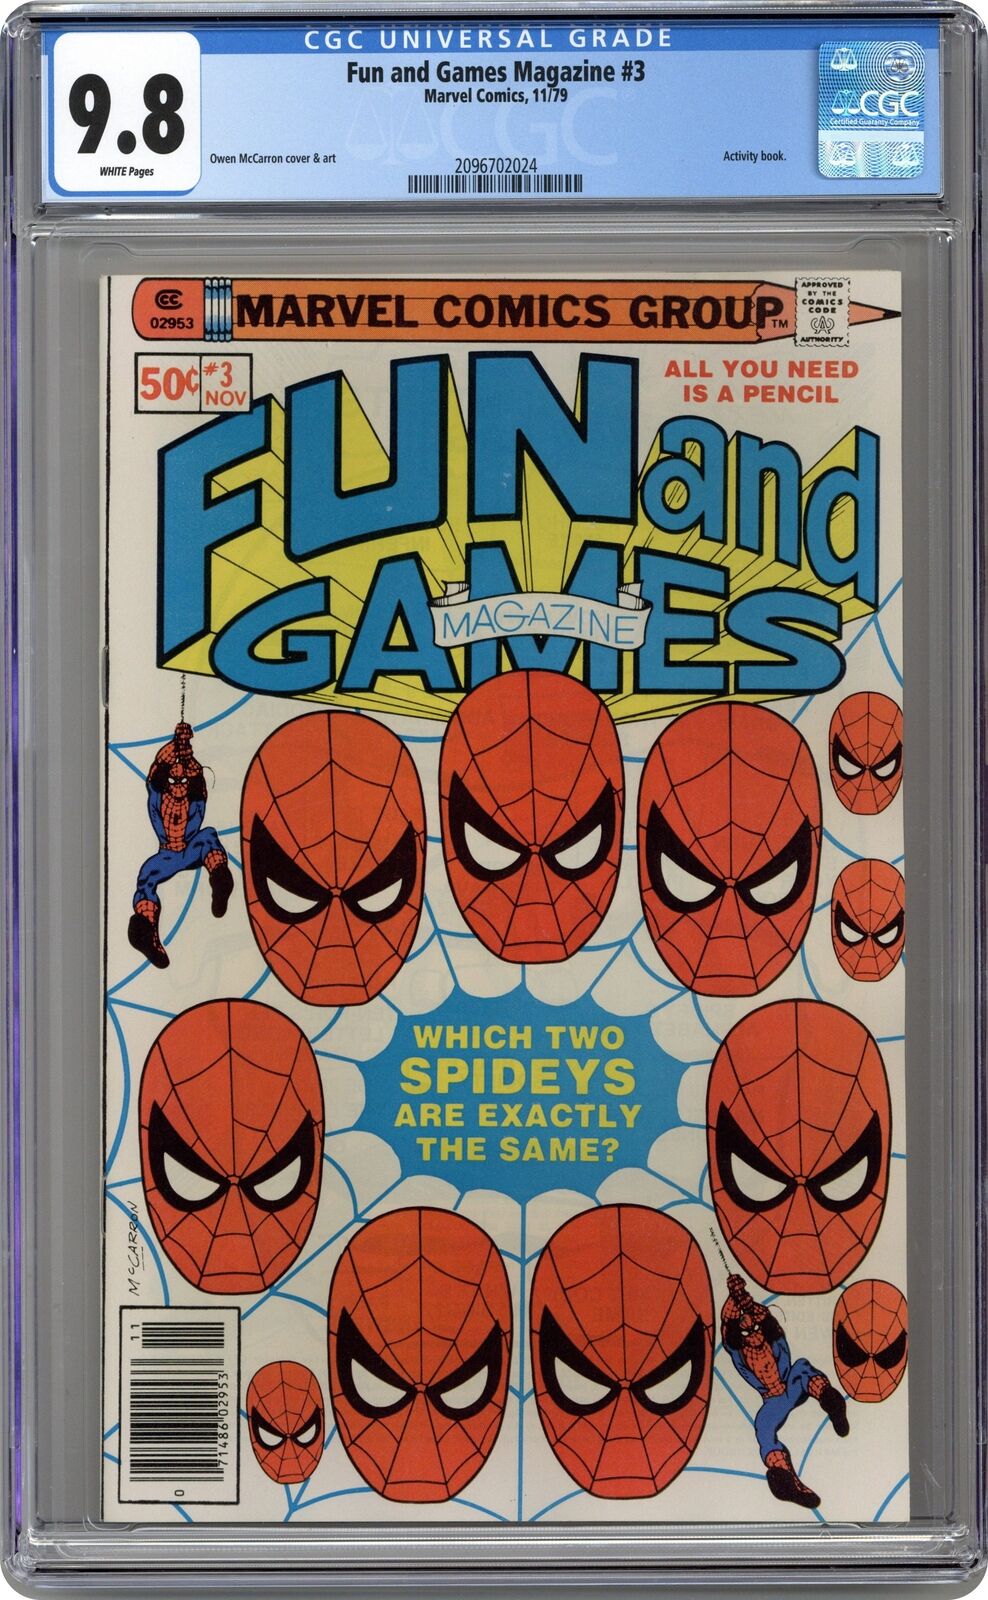 Marvel Fun and Games #3 CGC 9.8 1979 2096702024